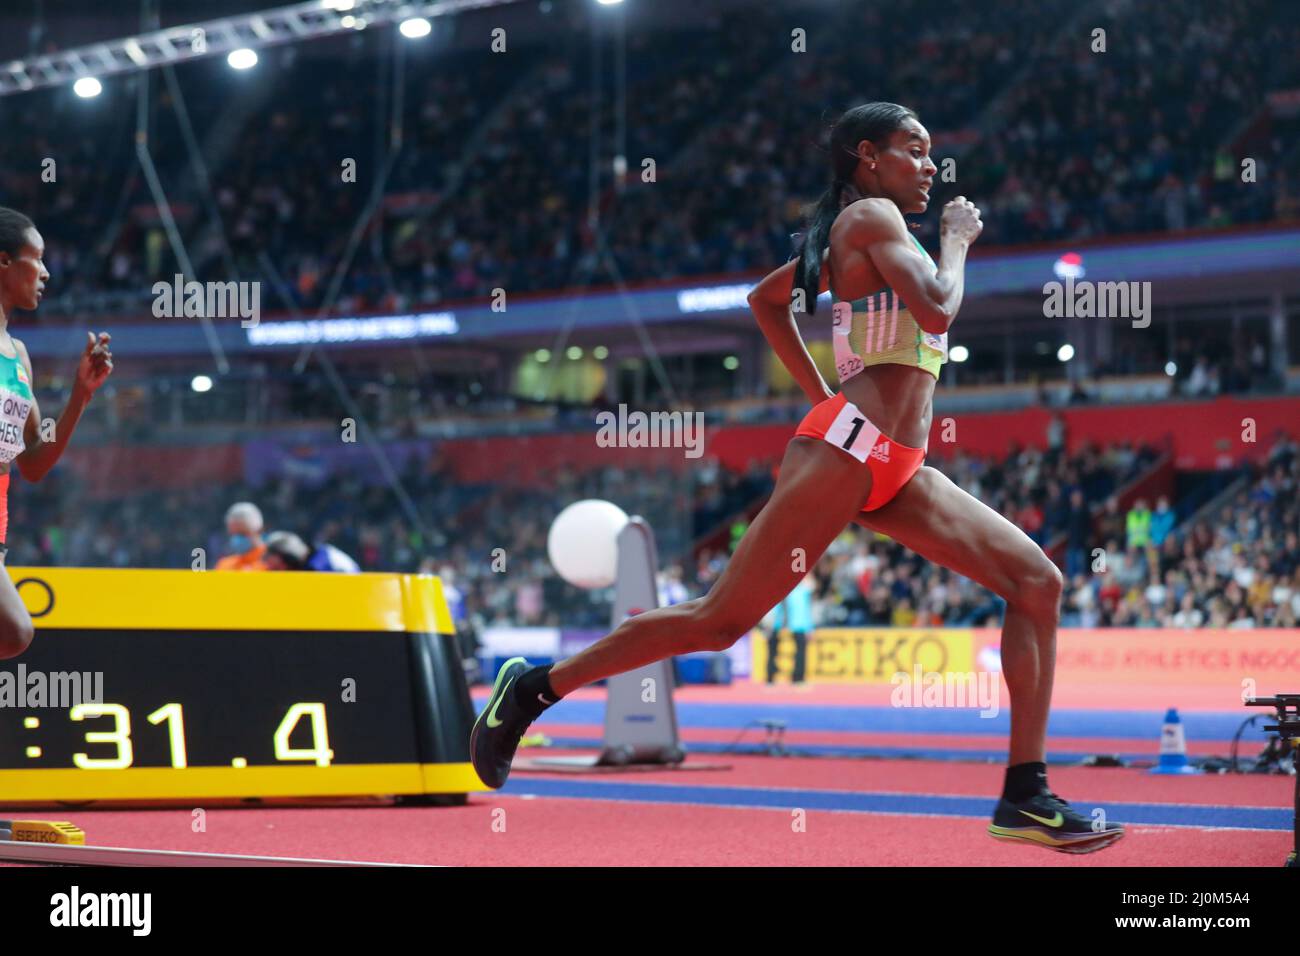 Belgrade, Serbia. 19th Mar, 2022. Axumawit Embaye of Ethiopia competes during the women's 1500m final at the World Athletics Indoor Championships Belgrade 2022 in Stark Arena, Belgrade, Serbia, March 19, 2022. Credit: Shi Zhongyu/Xinhua/Alamy Live News Stock Photo